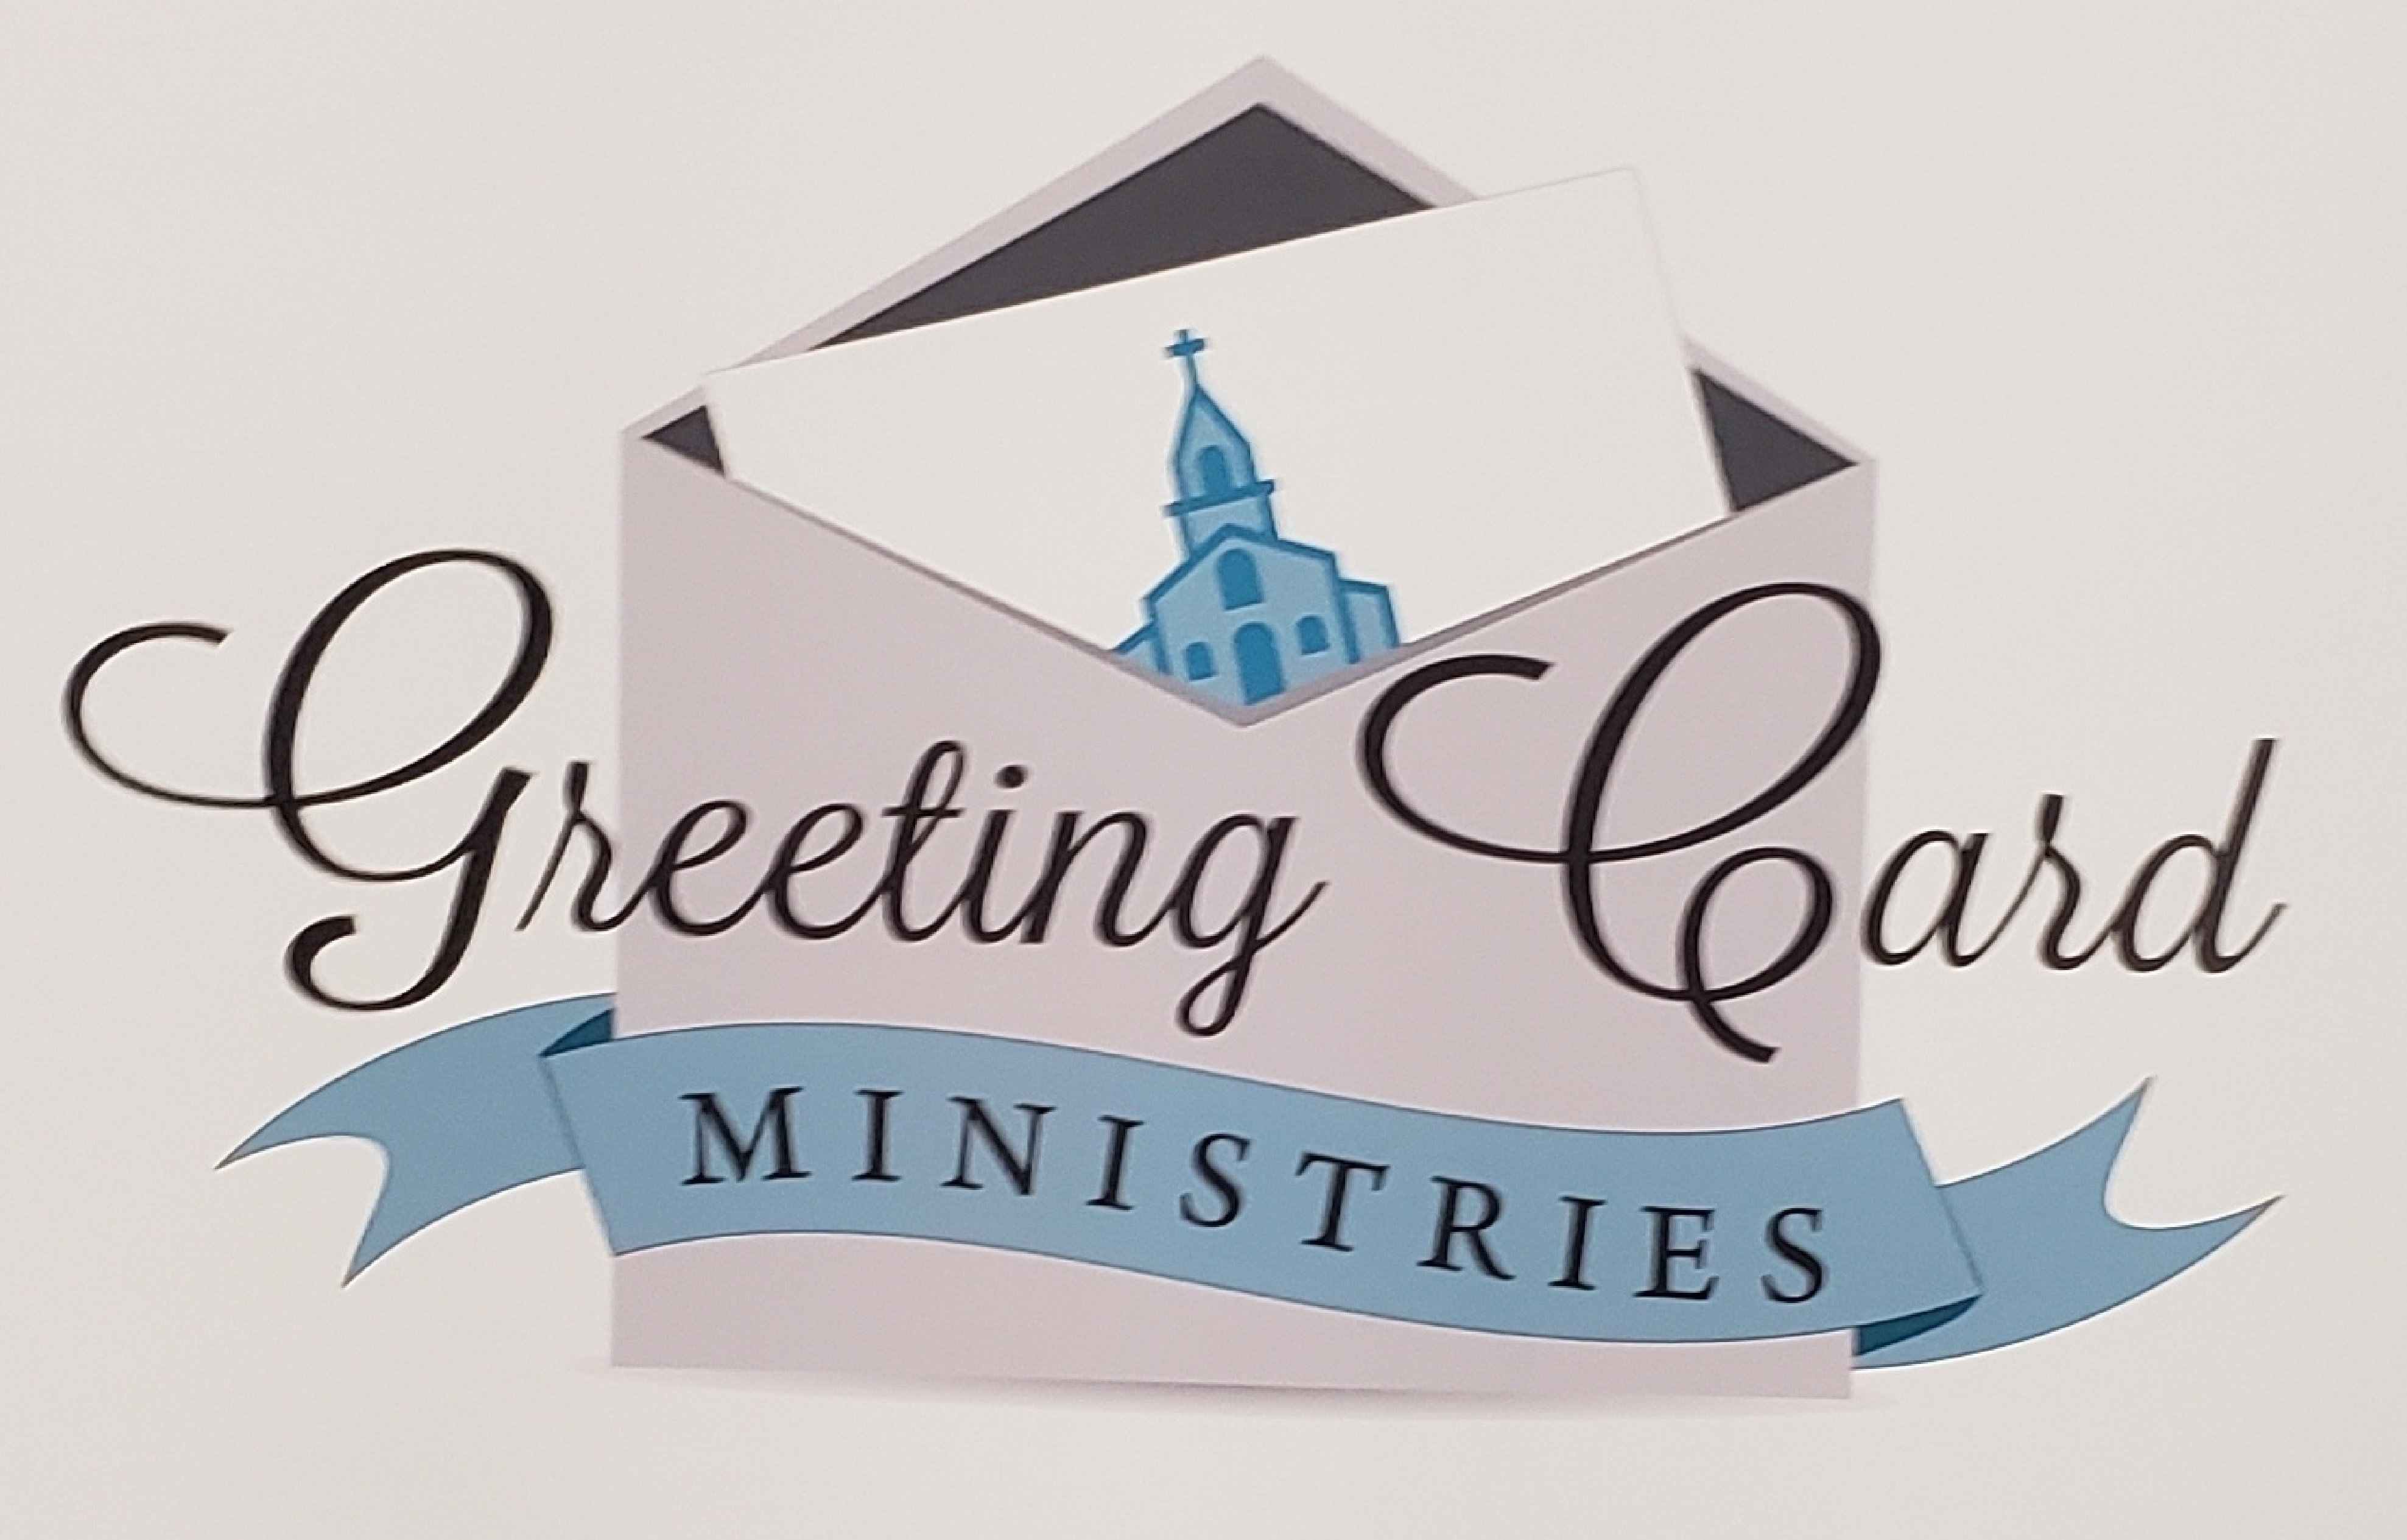 Issue 31-3 - Apostolic News - Greeting Card Ministry